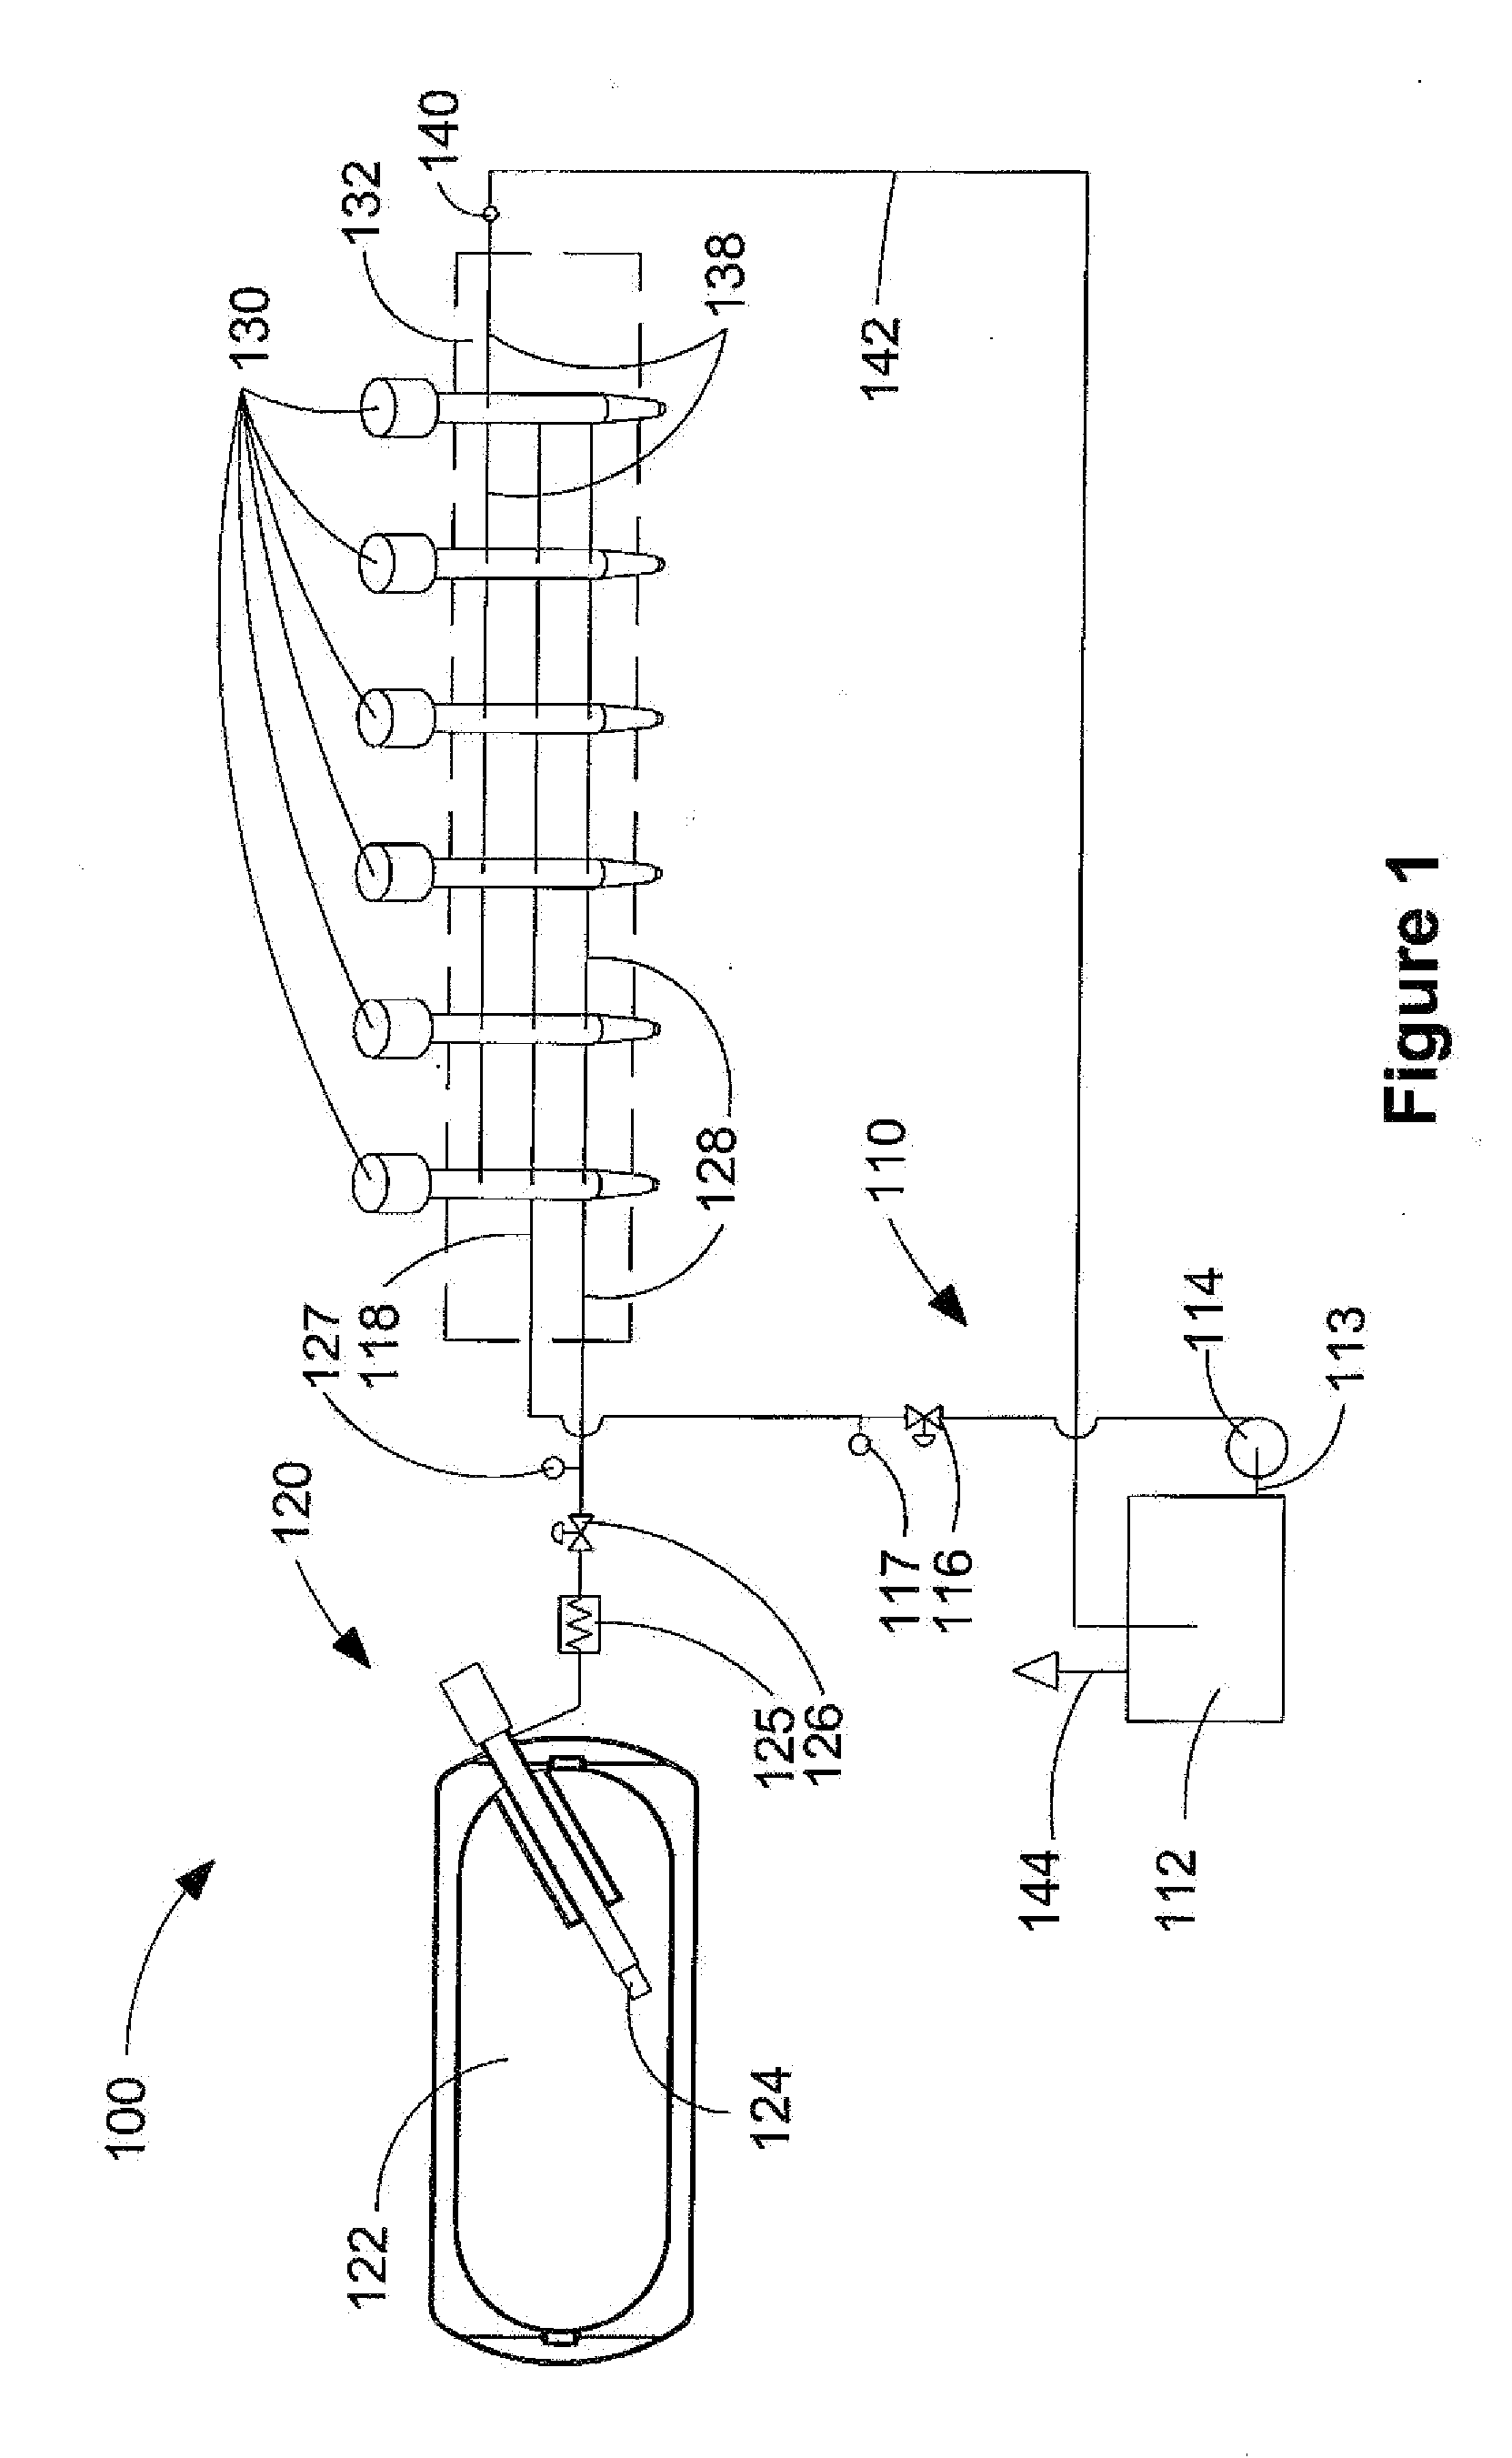 Method And Apparatus For Delivering Two Fuels To A Direct Injection Internal Combustion Engine